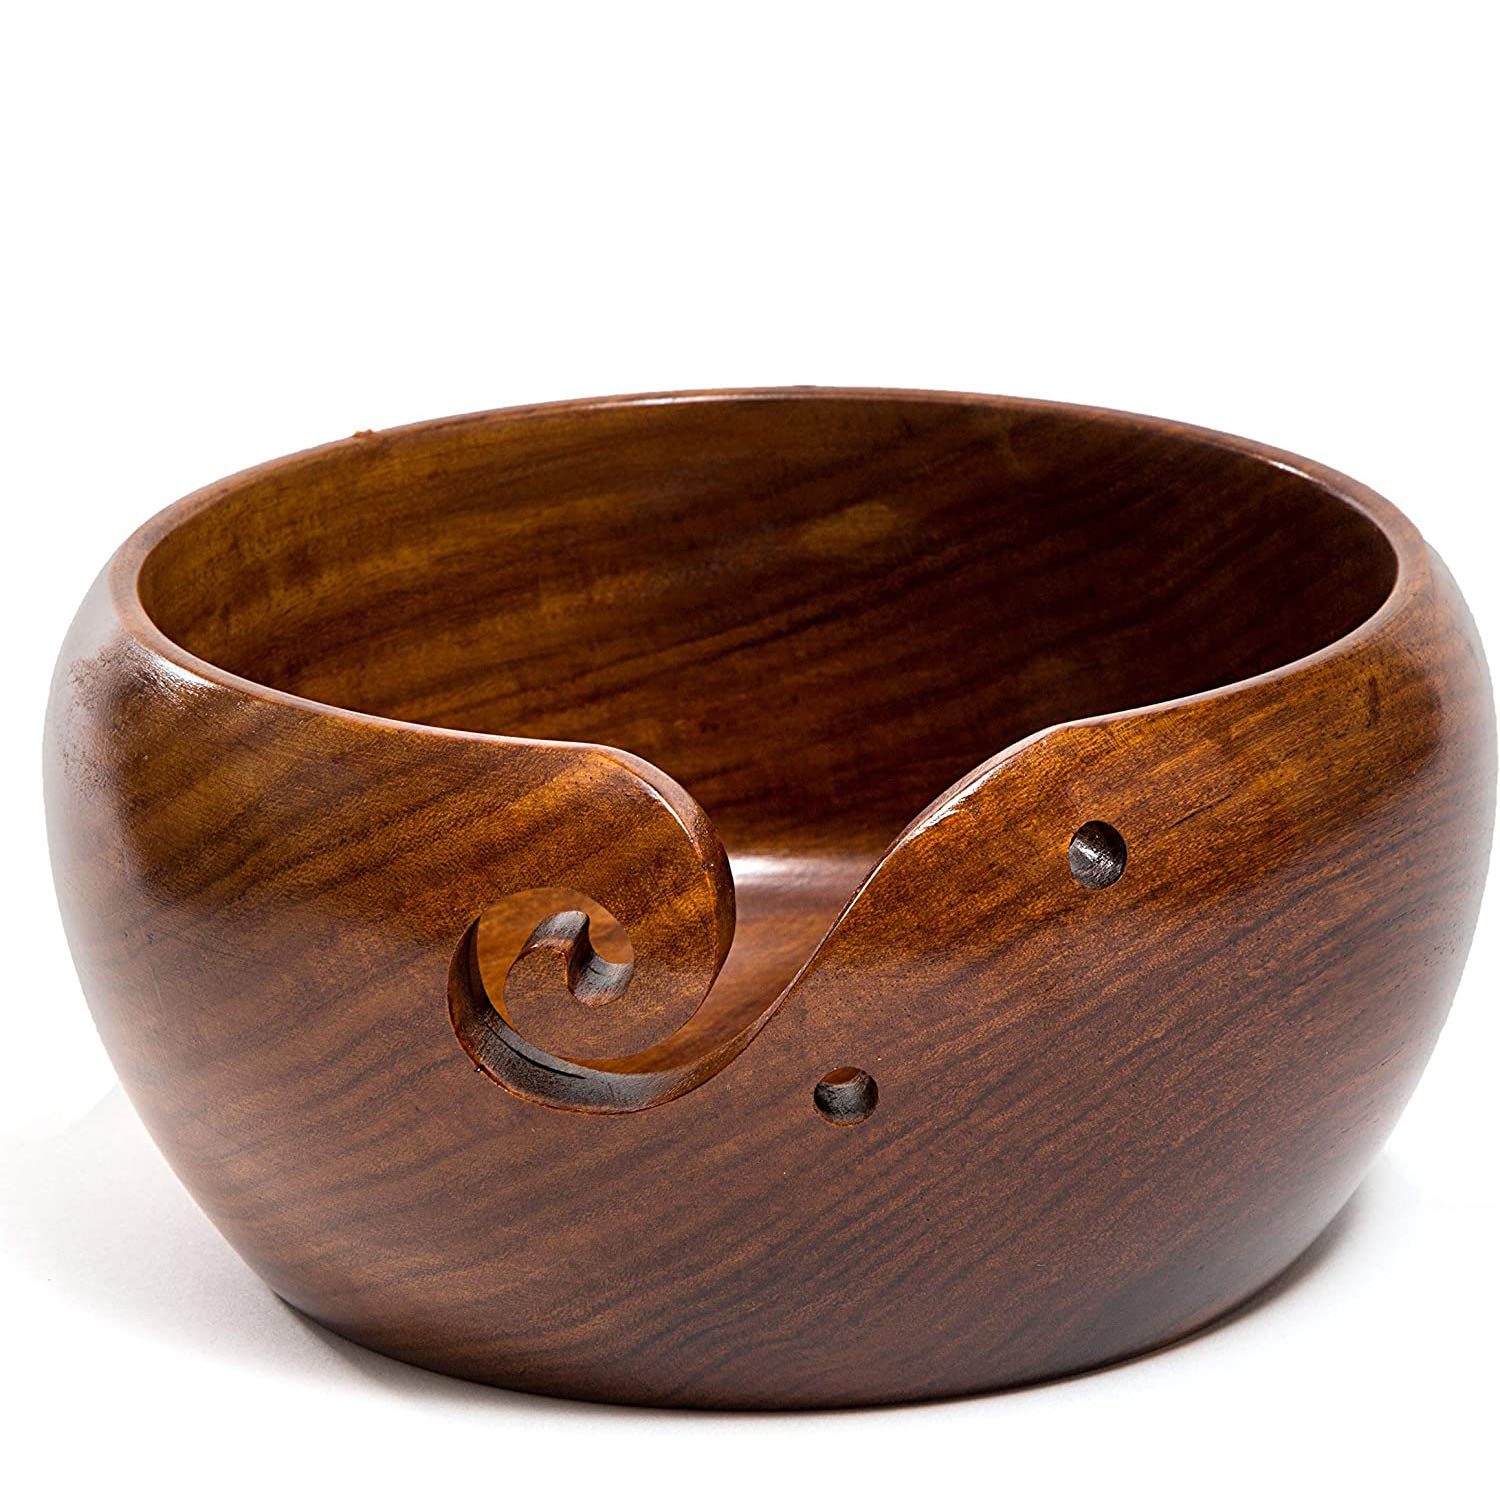  Premium Rosewood Crafted Yarn Storage Bowls with Decorative  Carved Handmade Grills - Knitting & Crochet Accessories Supplies (Set)